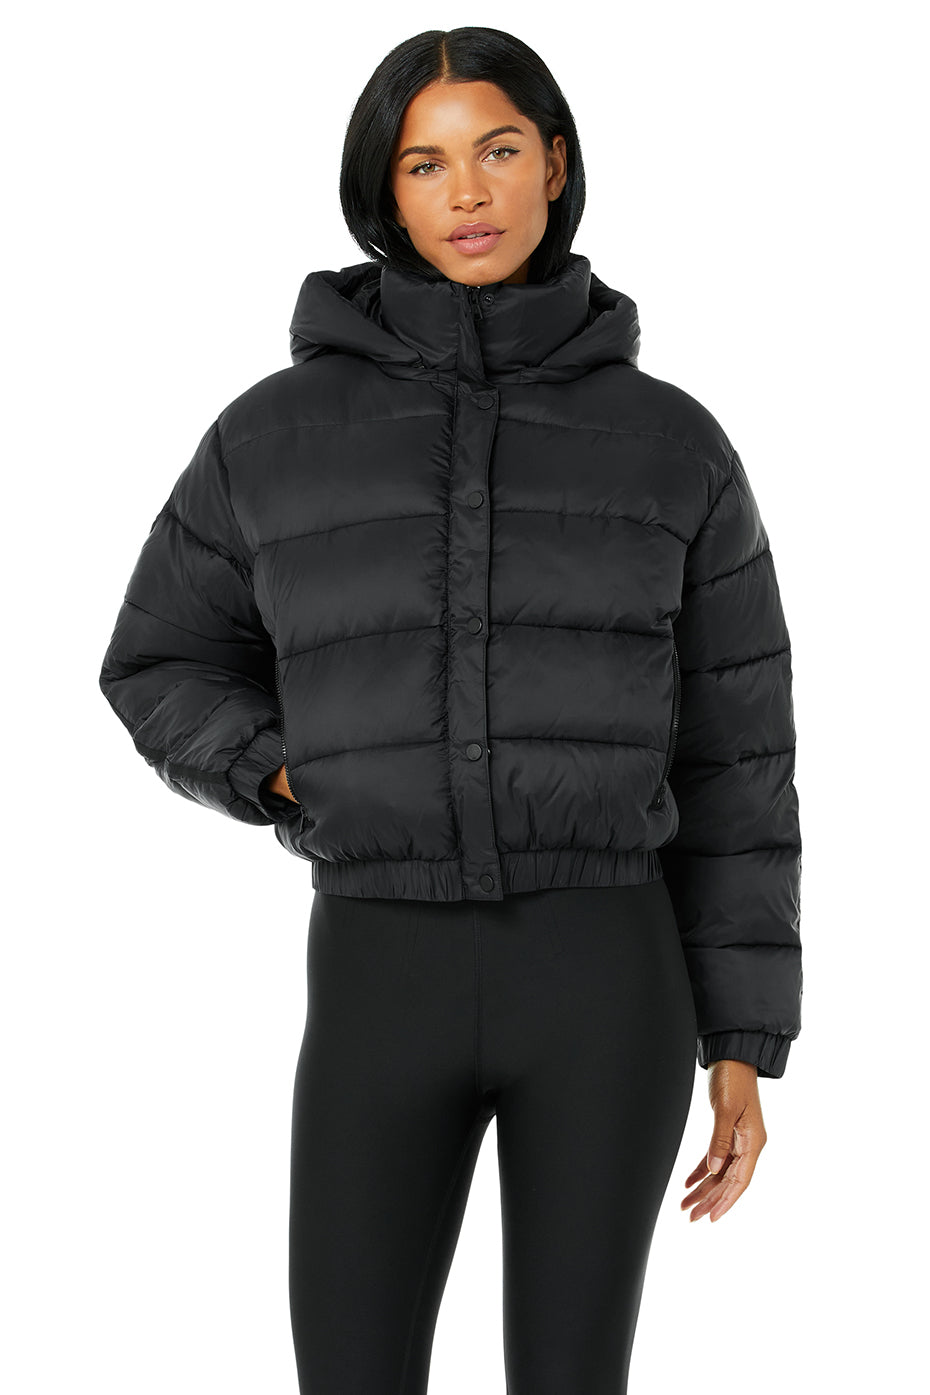 Aspen Love Puffer Jacket in Black by Alo Yoga - Work Well Daily